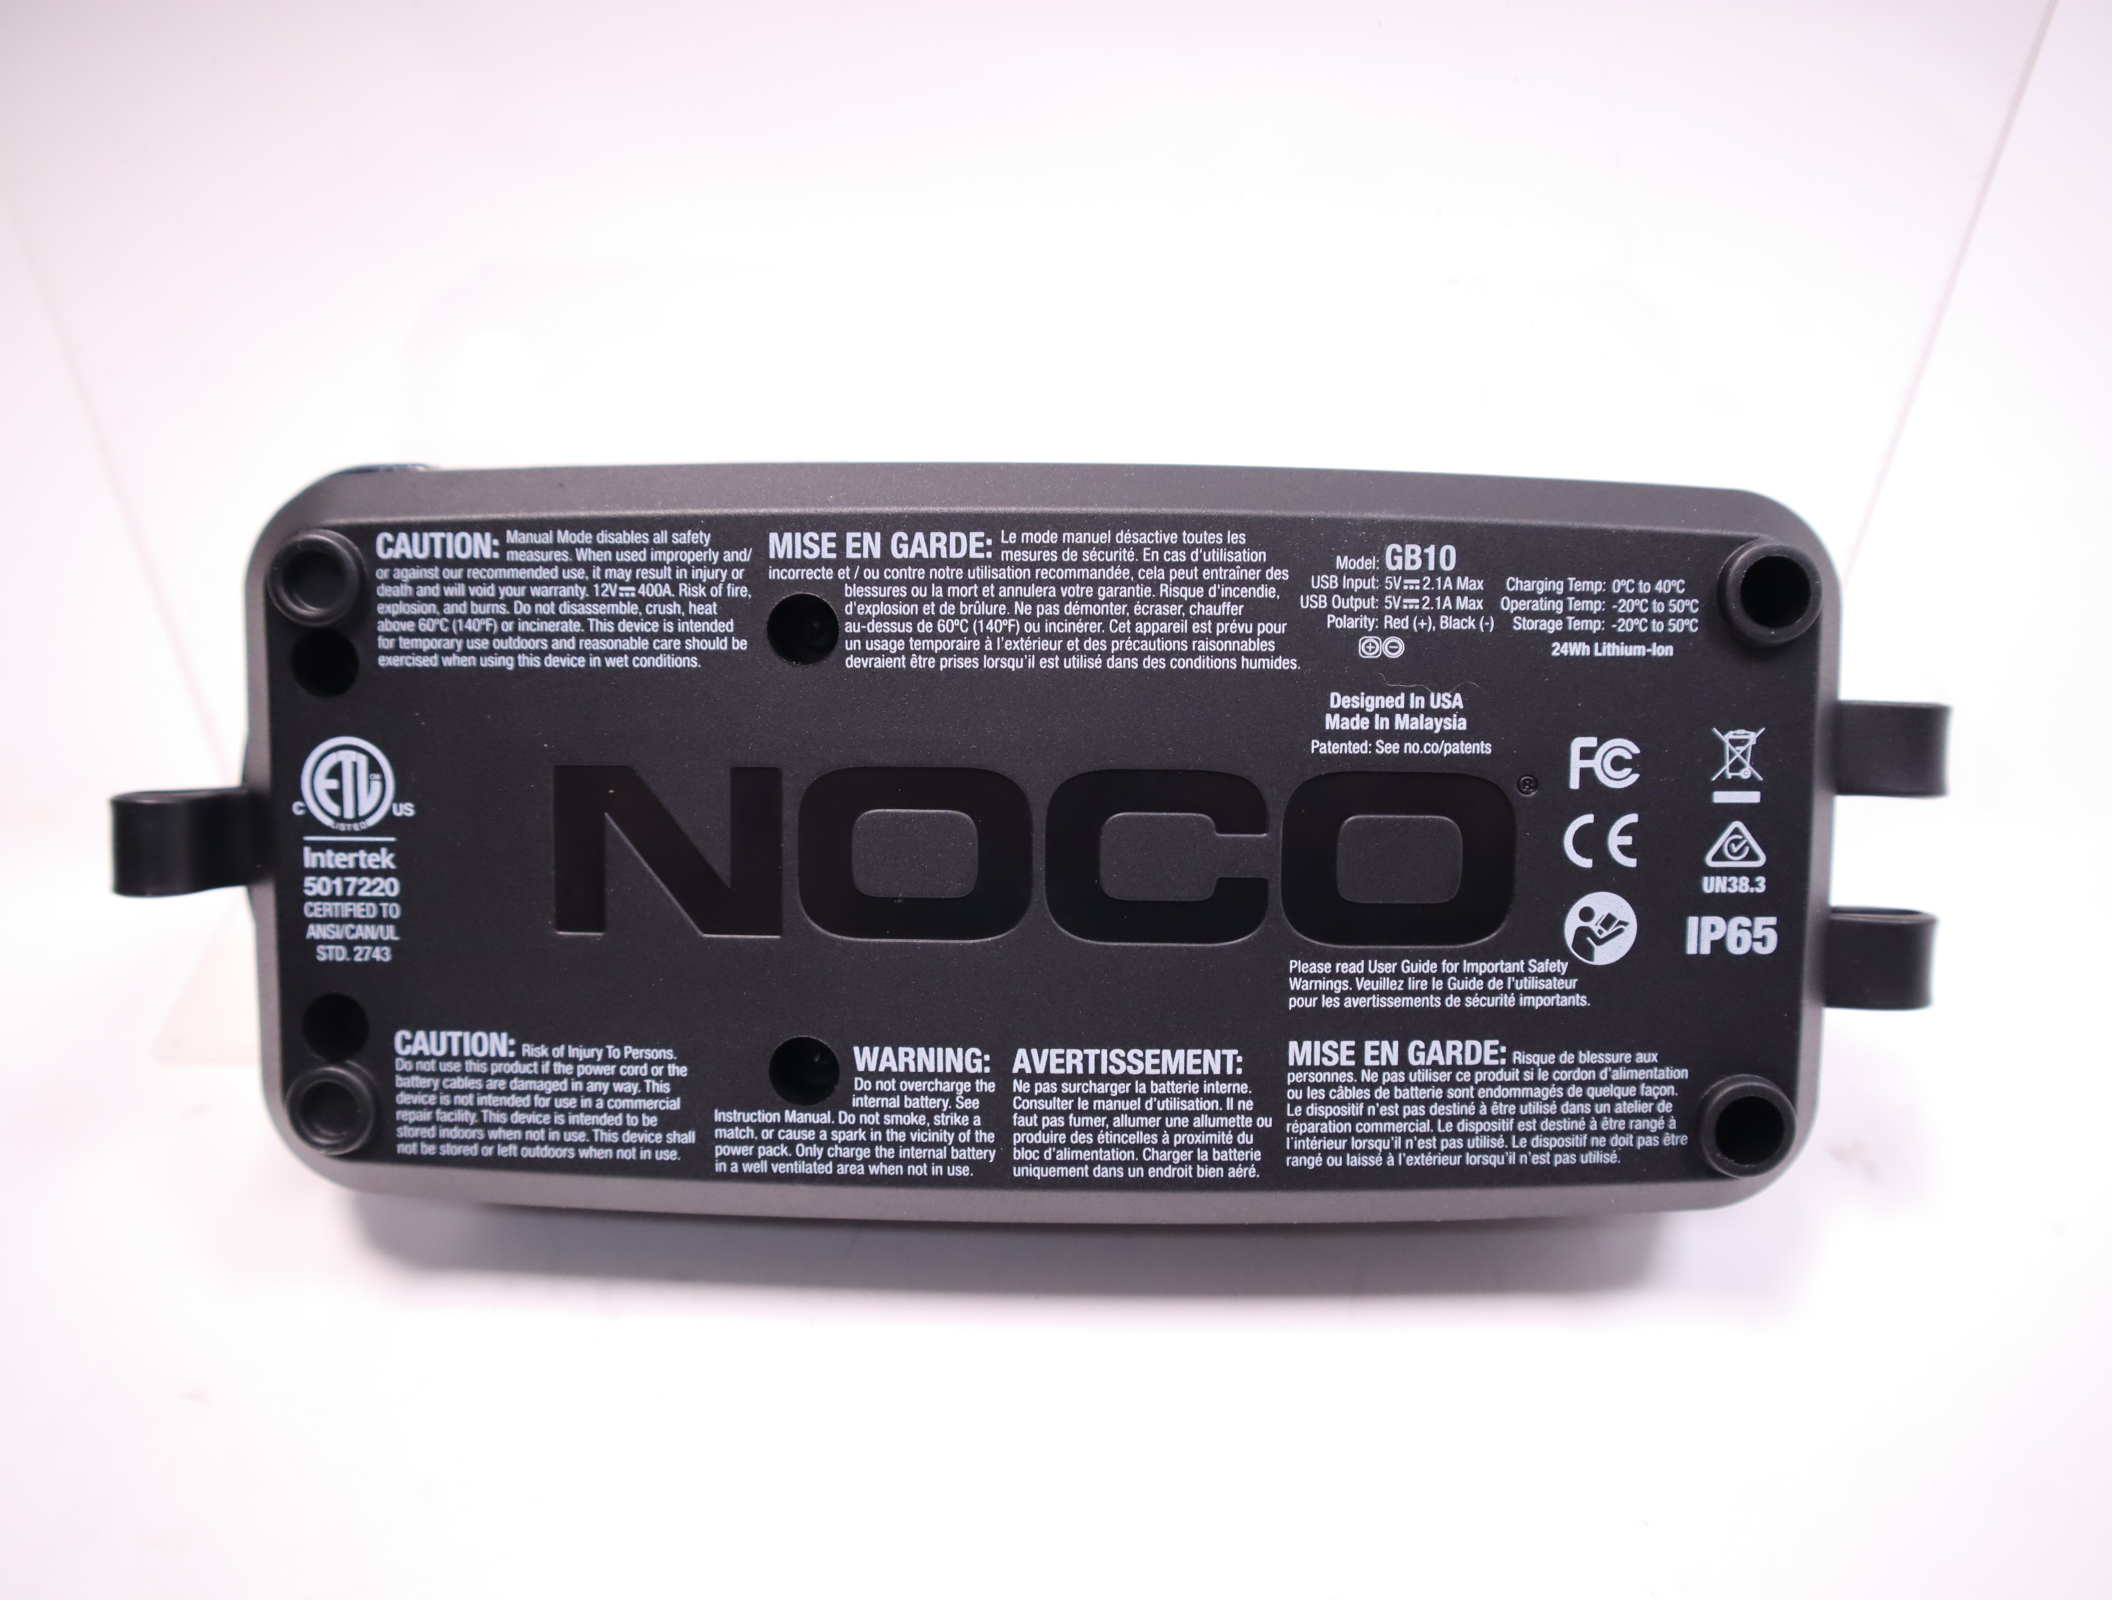 NOCO - Our Products